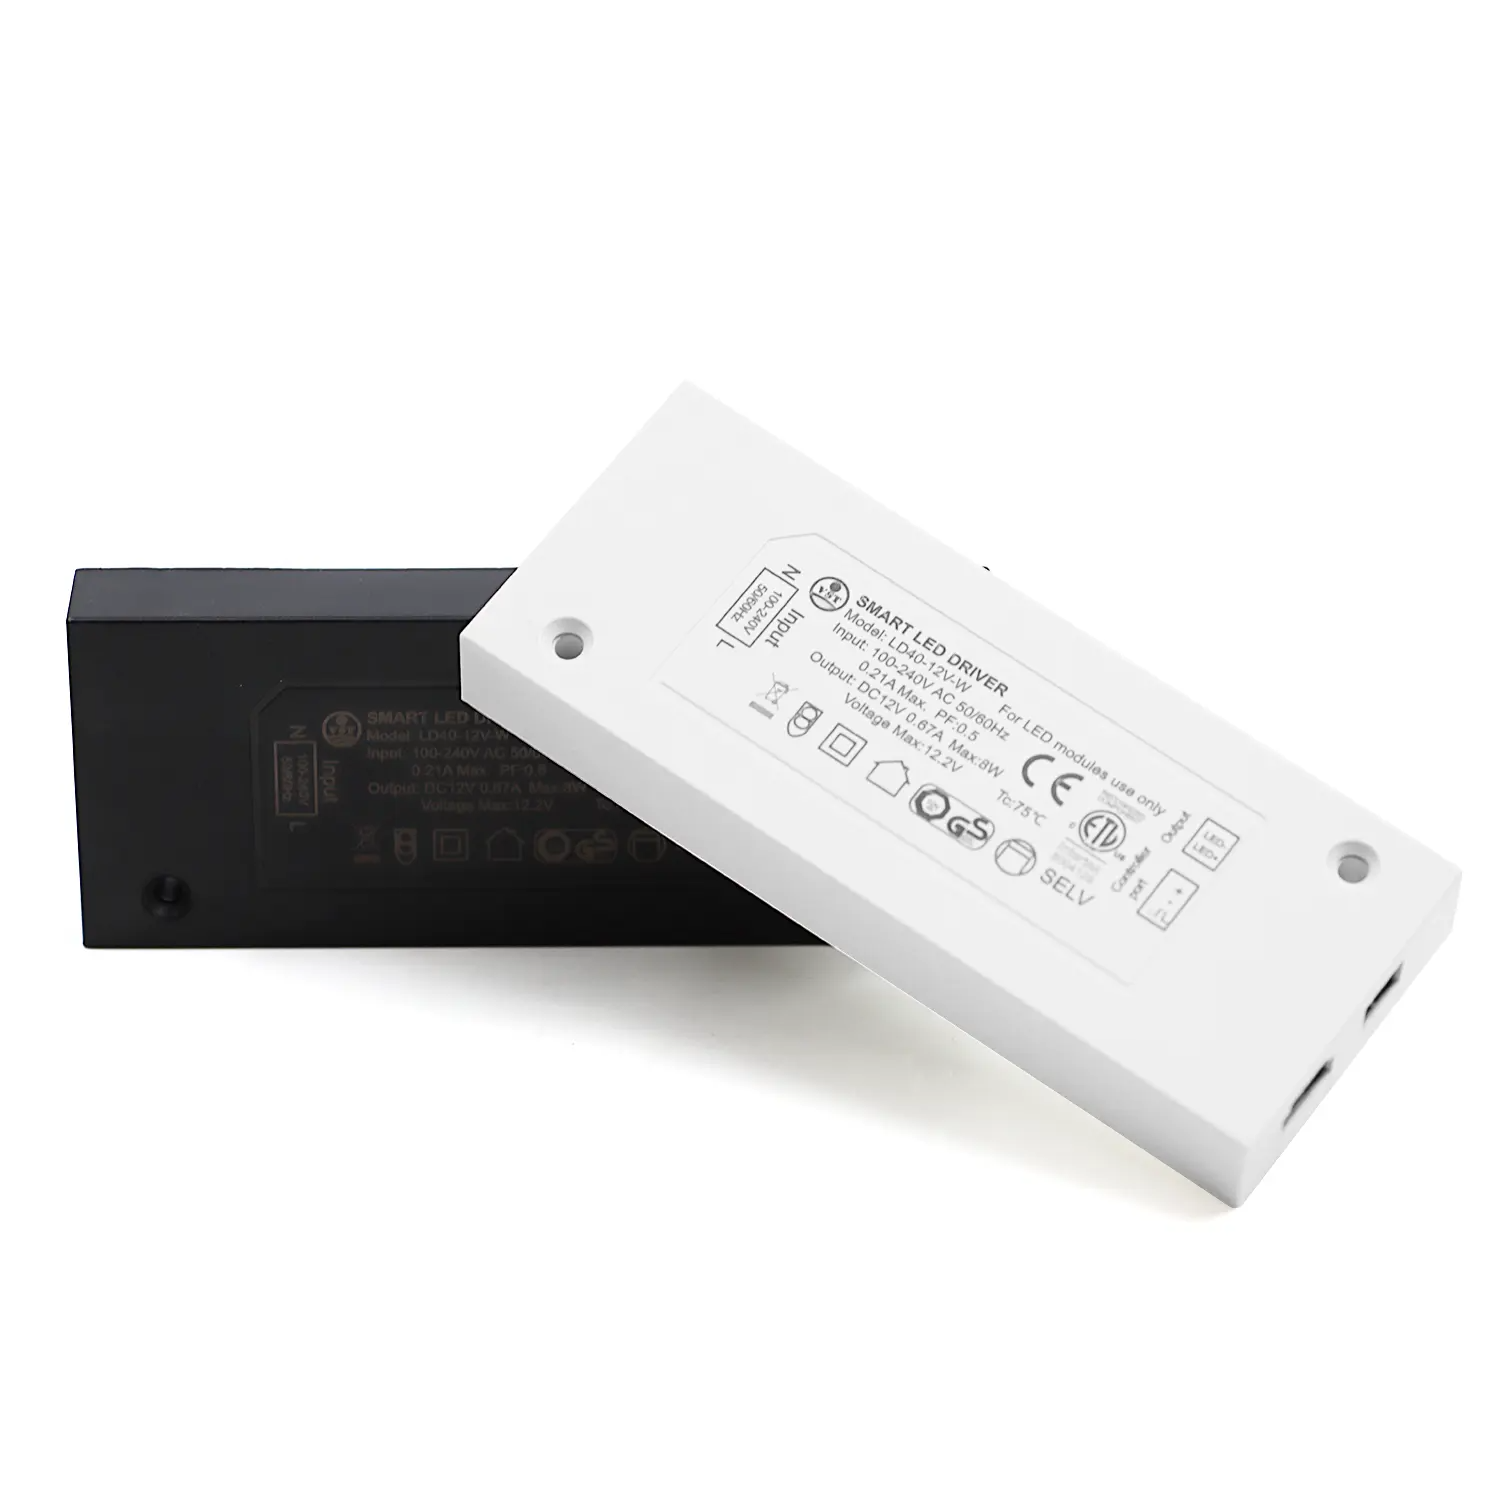 Send Inquiry for 12V Reliable Constant Current LED Driver 8W LED Tape Transformer with TUV-GS/ETL to high-quality Constant Current LED Driver supplier. Wholesale LED Power Supply directly from China Constant Current LED Driver manufacturers/exporters. Get a factory sale price list and become a distributor/agent | VSTLED.COM